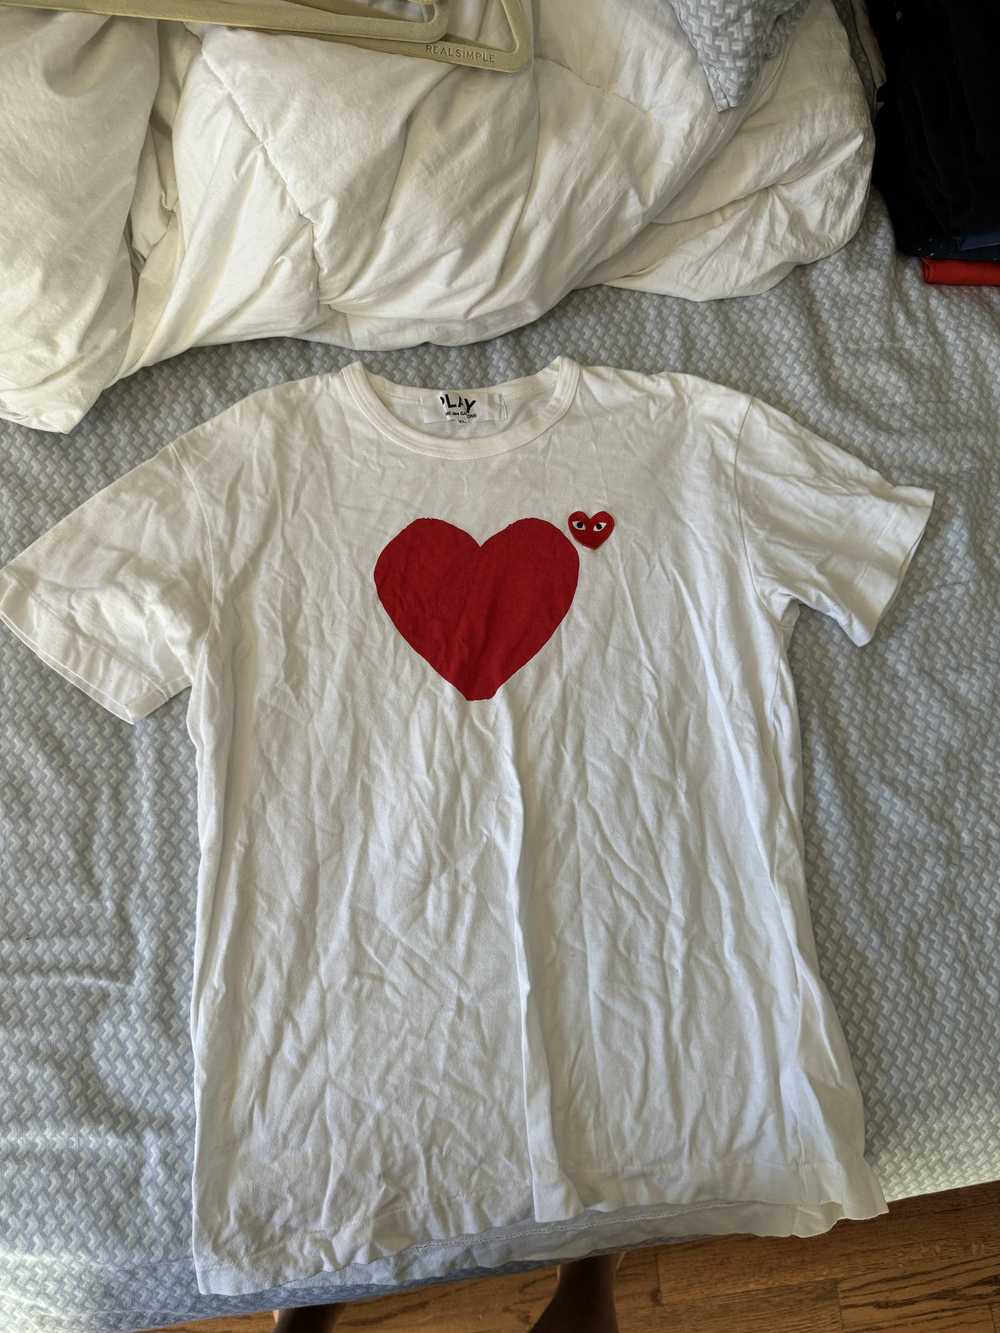 Comme des Garcons CDG Heart White Tee - image 1